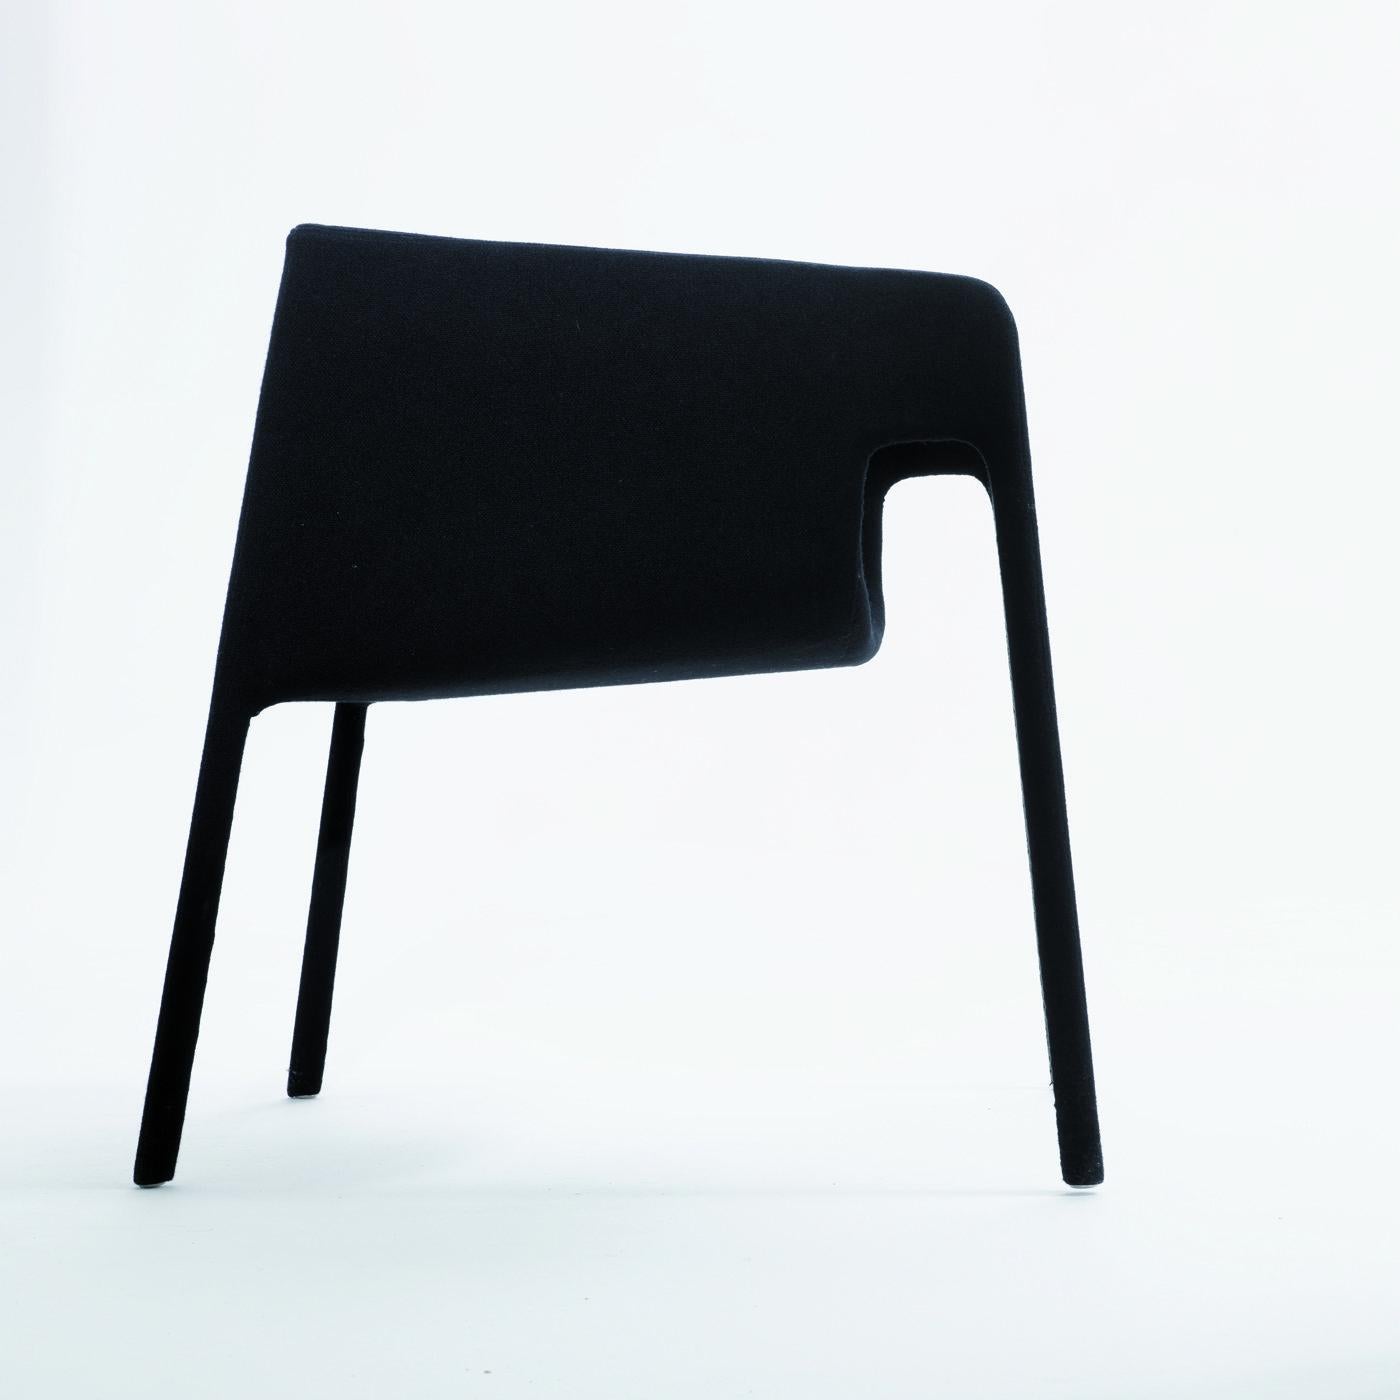 This exquisite chair by StokkeAustad reveals its harmonious balance through the pure lines and soft contours of its unique silhouette. Entirely covered in soft black leather, the unique construction features a curved design on the front that